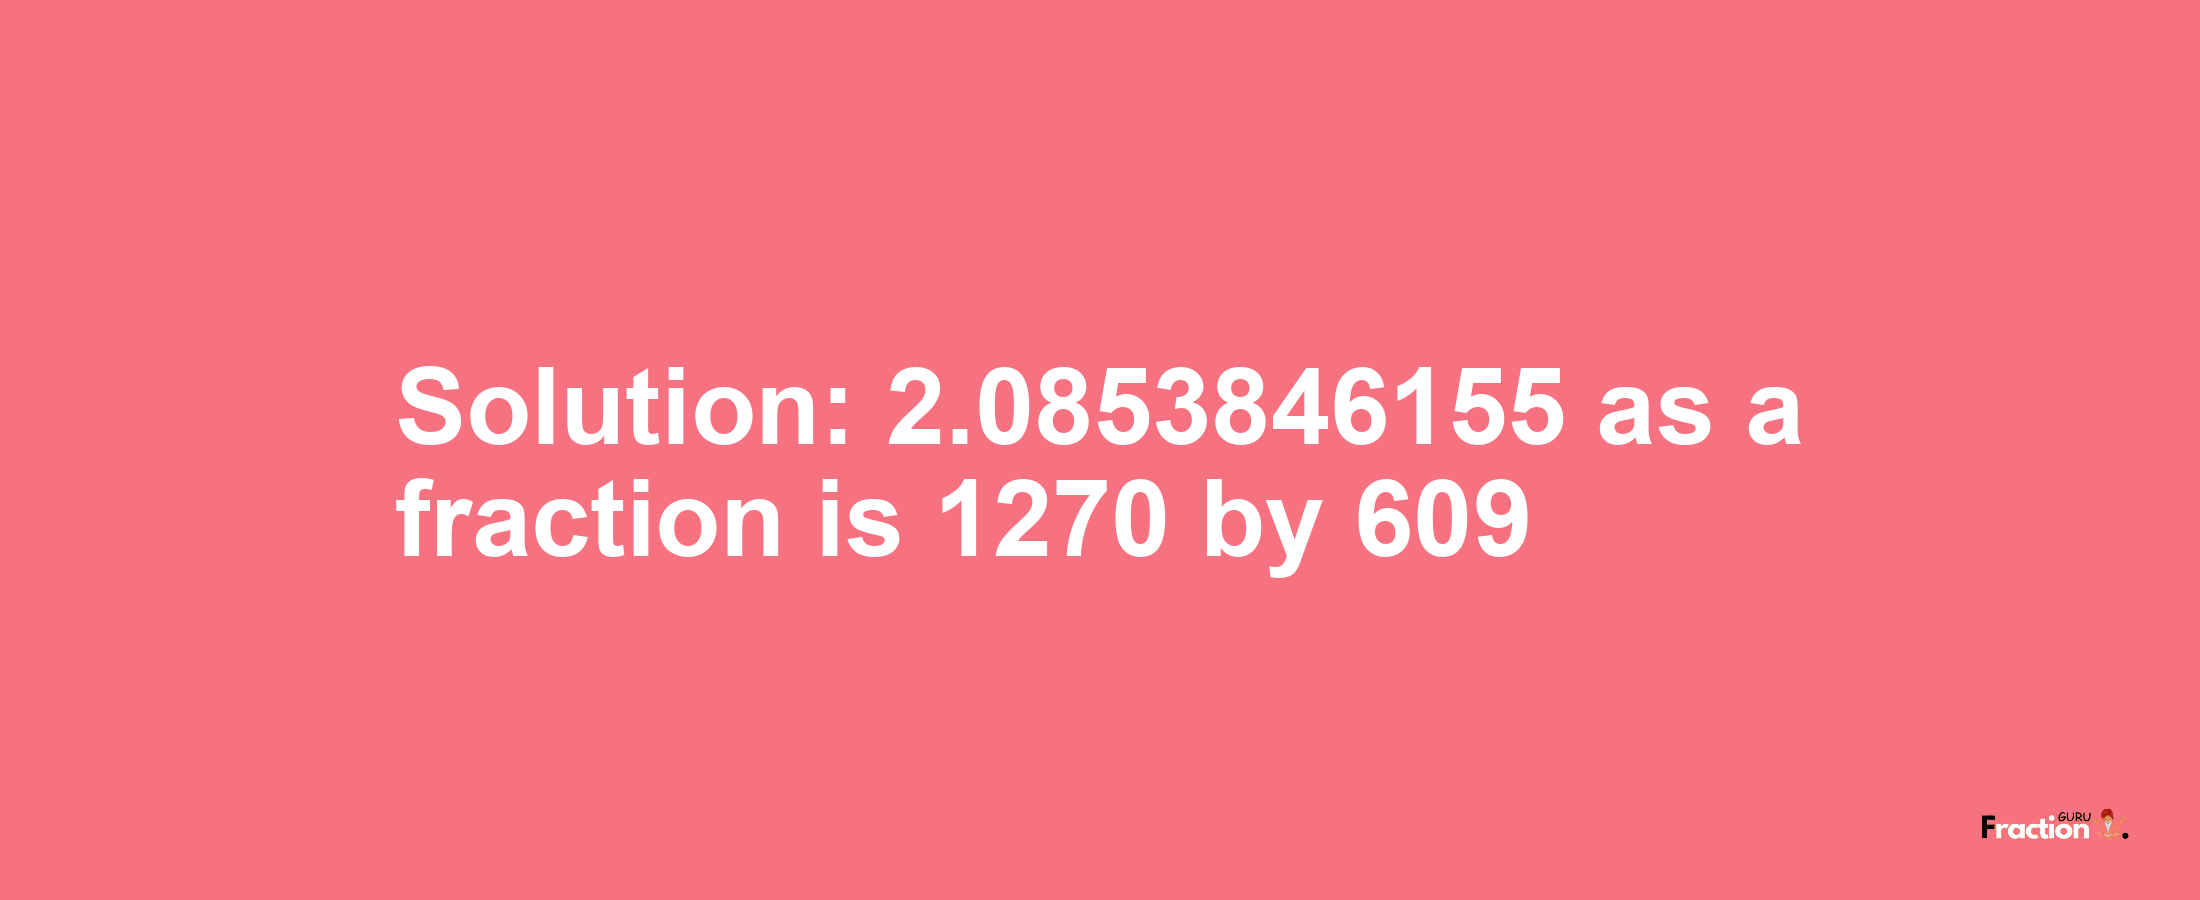 Solution:2.0853846155 as a fraction is 1270/609